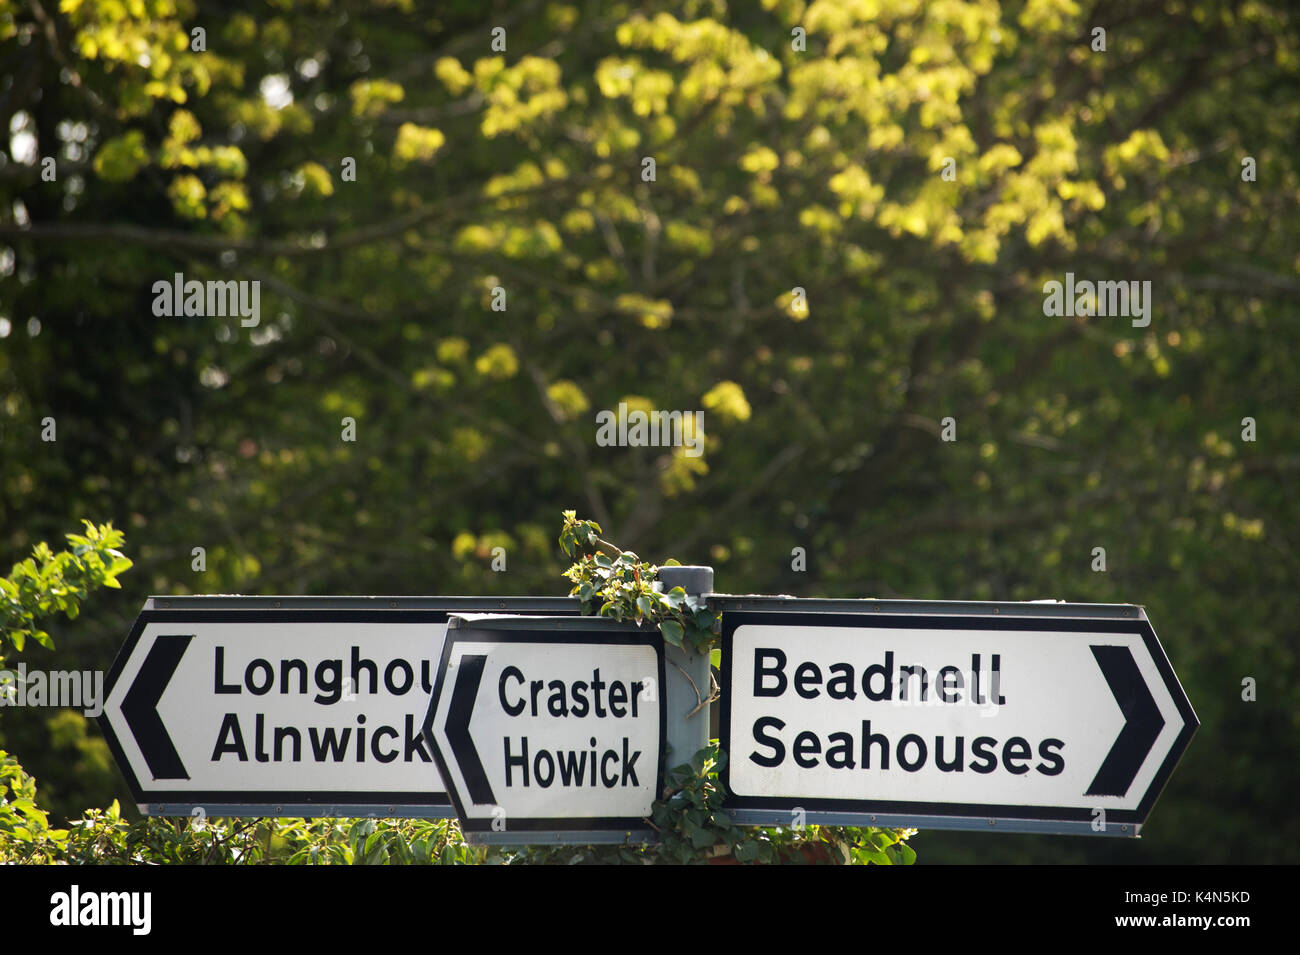 Craster, Howick,Alnwick, Beadnell, Seahouses, Longhoughton road sign in Embleton, , Northumberland Stock Photo